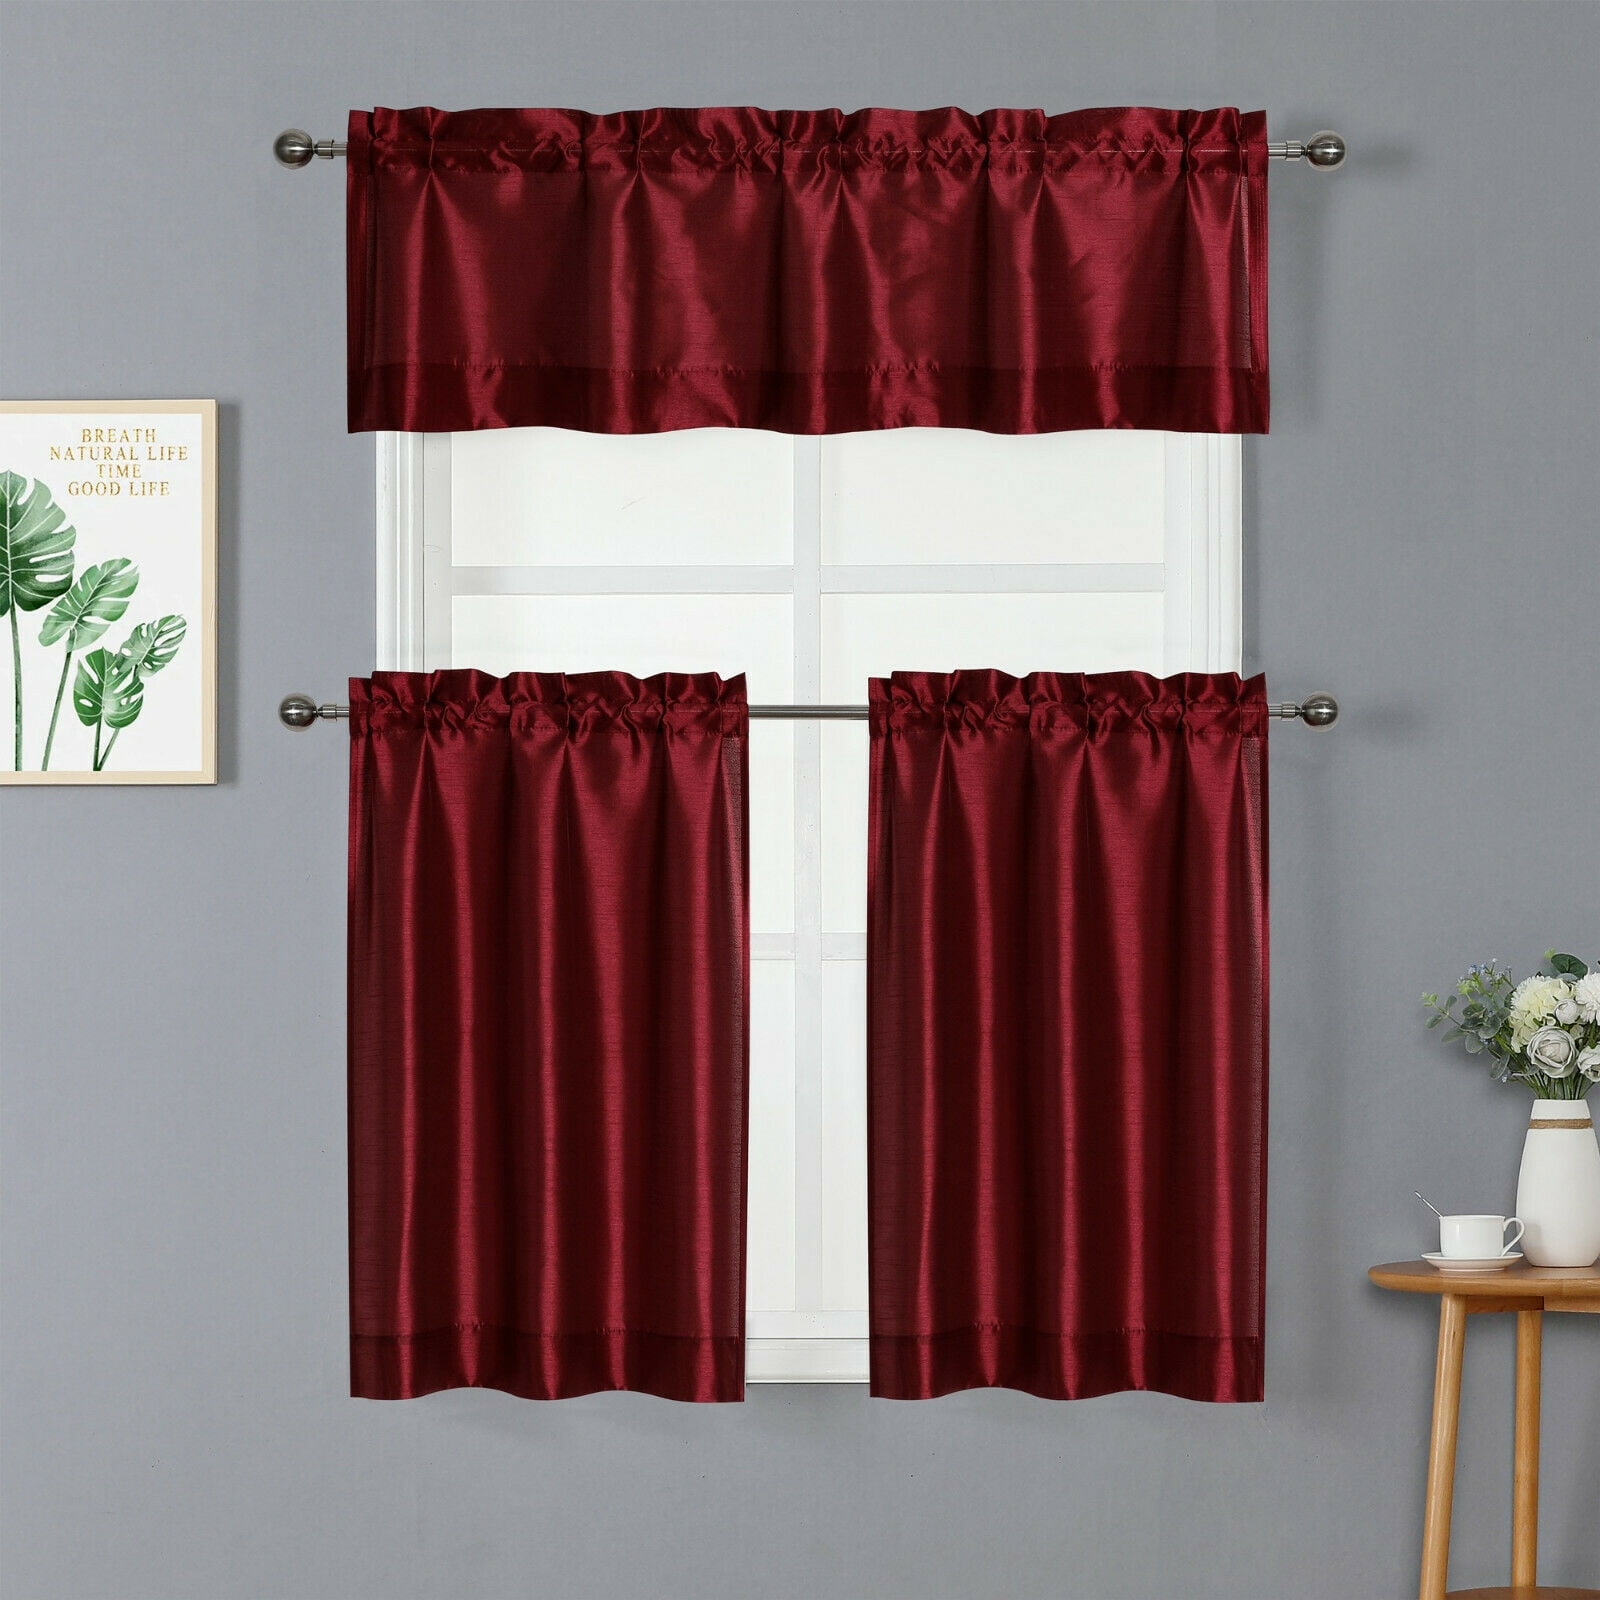 Better Homes & Gardens Farmhouse Country Rustic Farm Window Valance Cream Red 